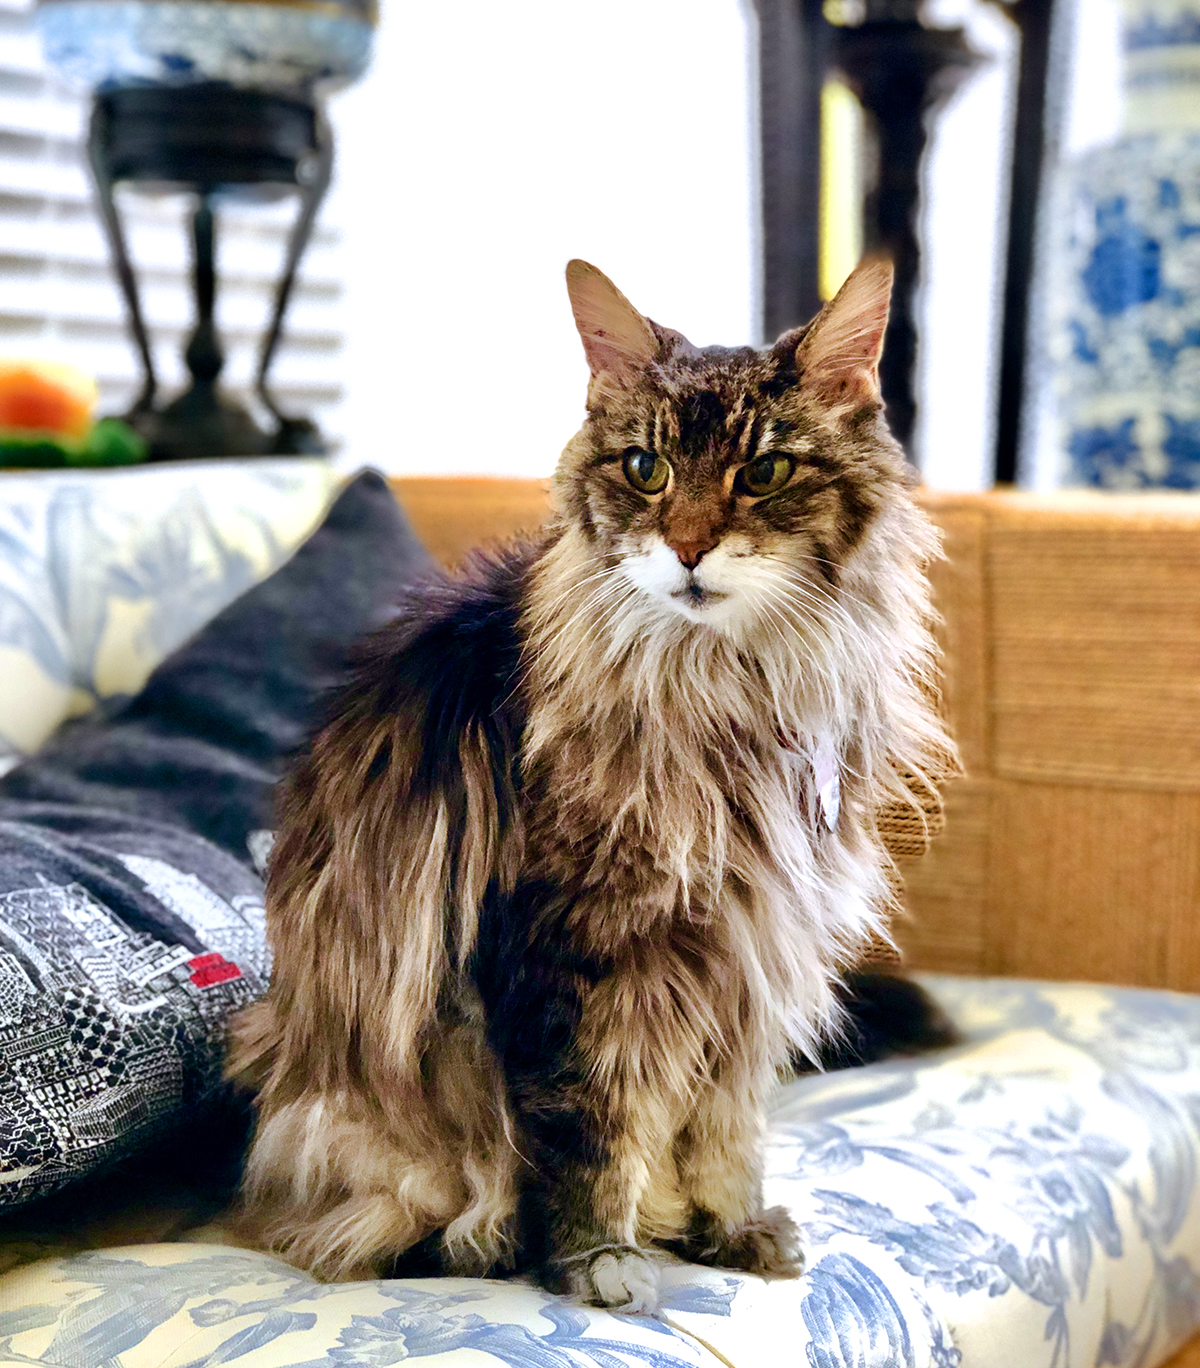 Starbright the Maine Coon